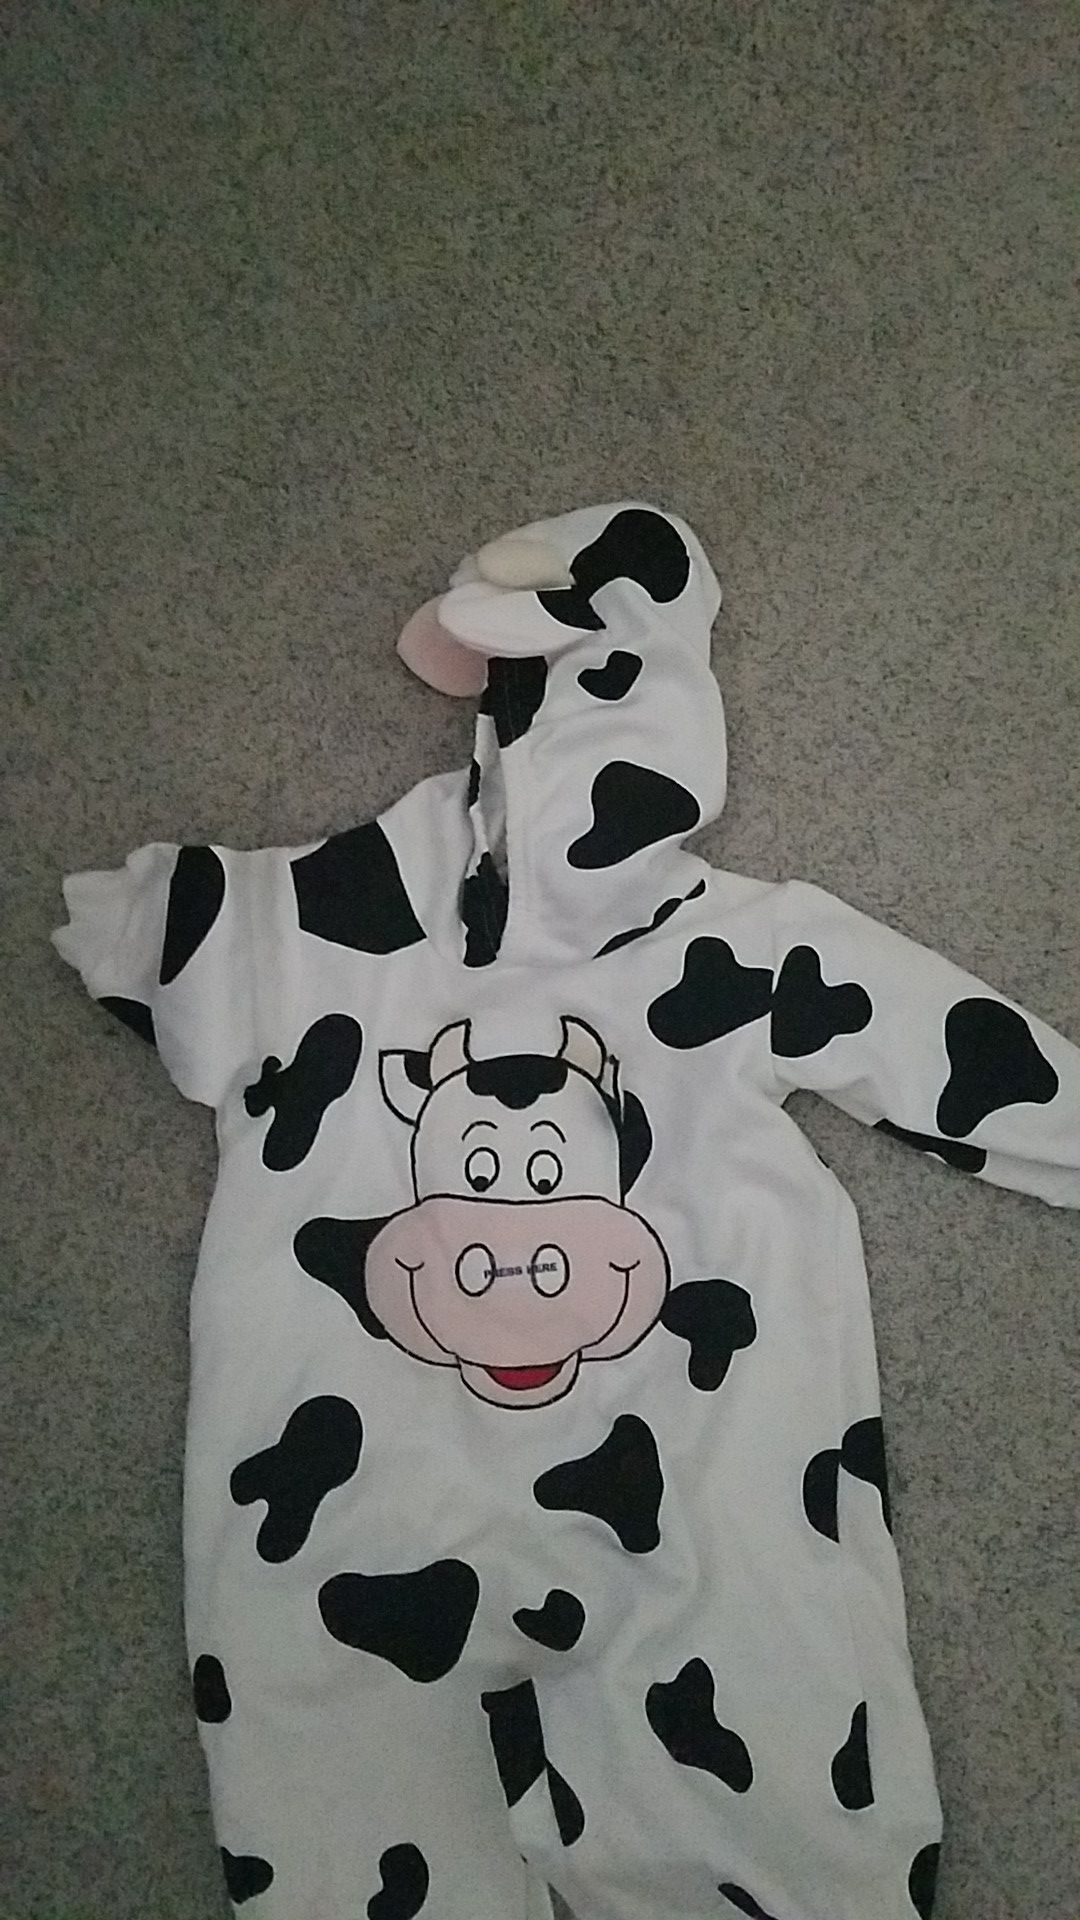 Halloween Cow costume - fits 18 months